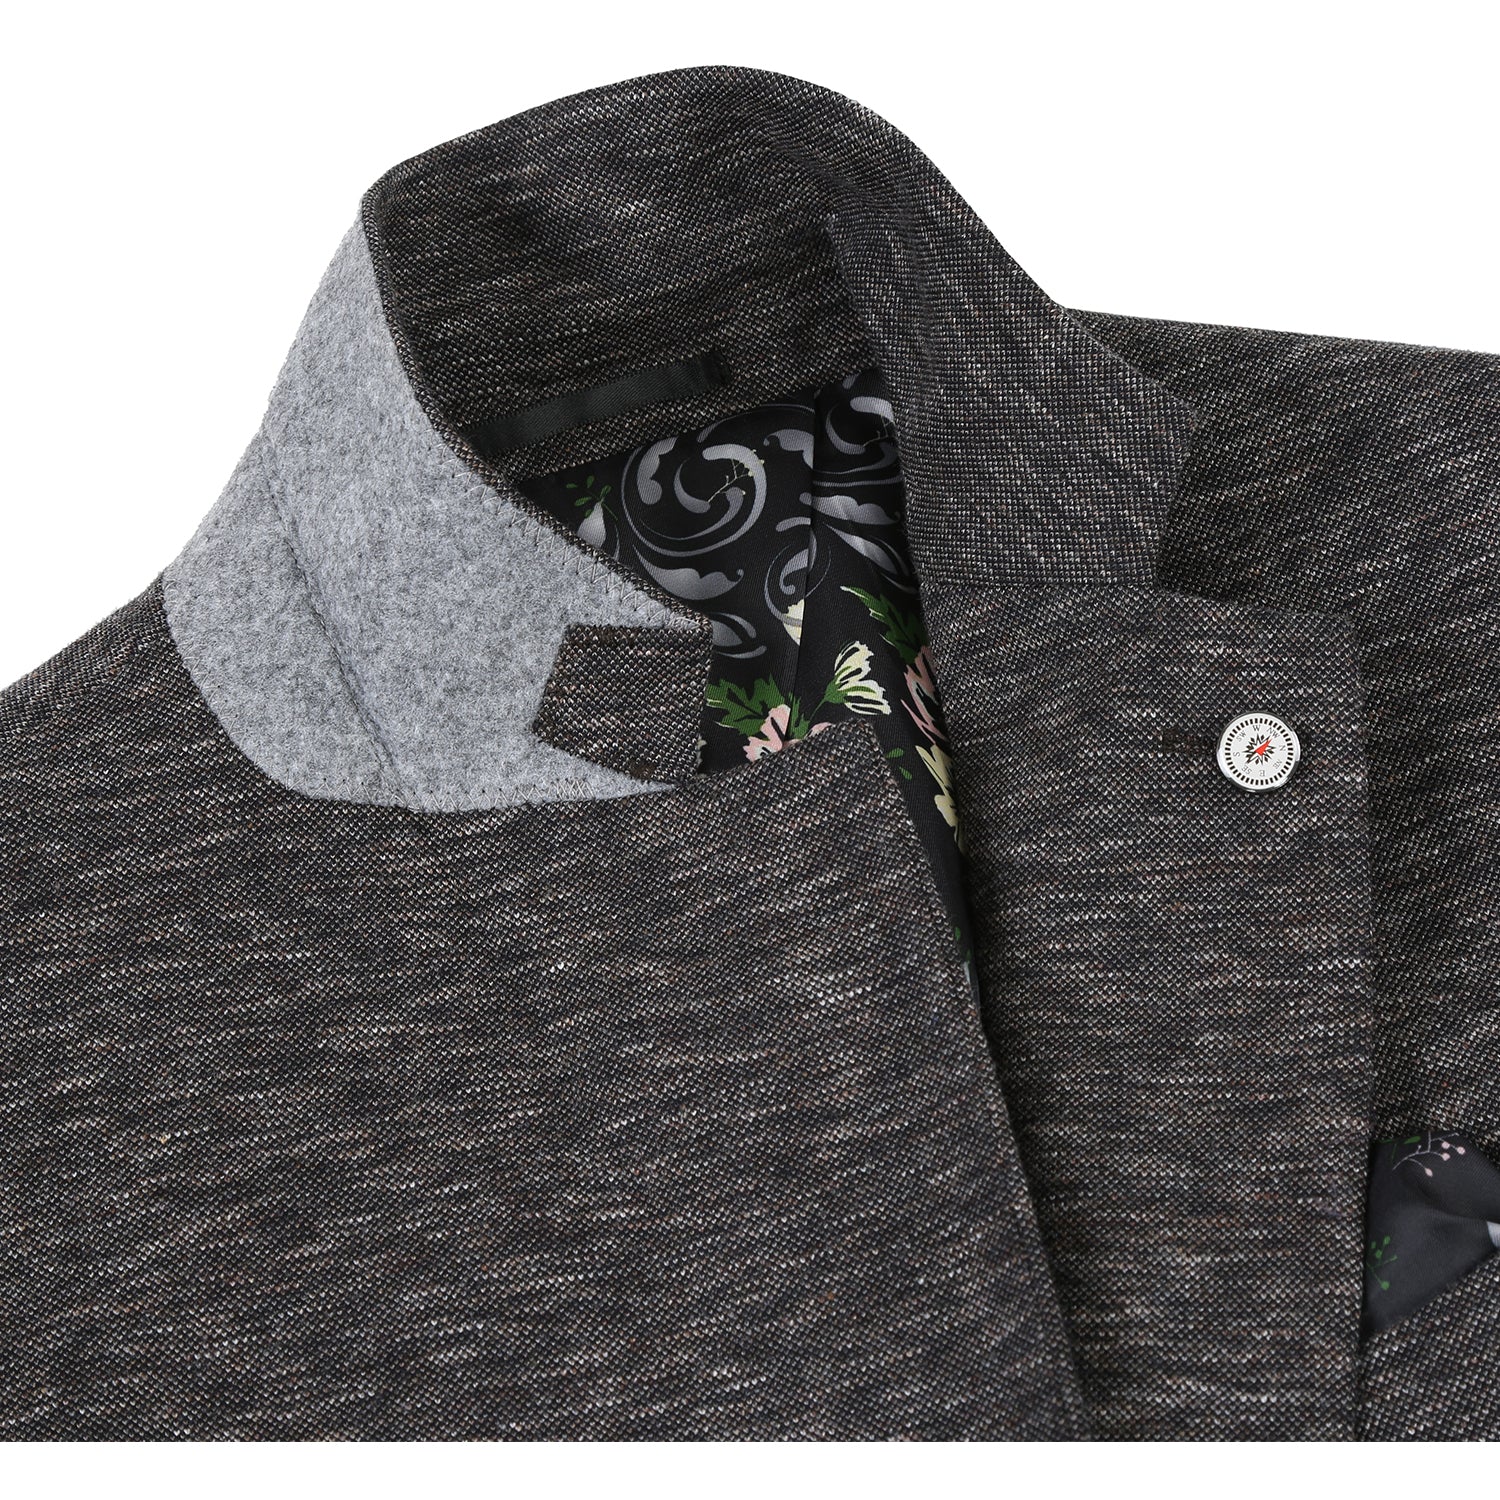 Single Breasted SLIM FIT Half Canvas Stretch Knit Soft Jacket in Grey and Brown Mélange (Short, Regular, and Long Available) by Pelago